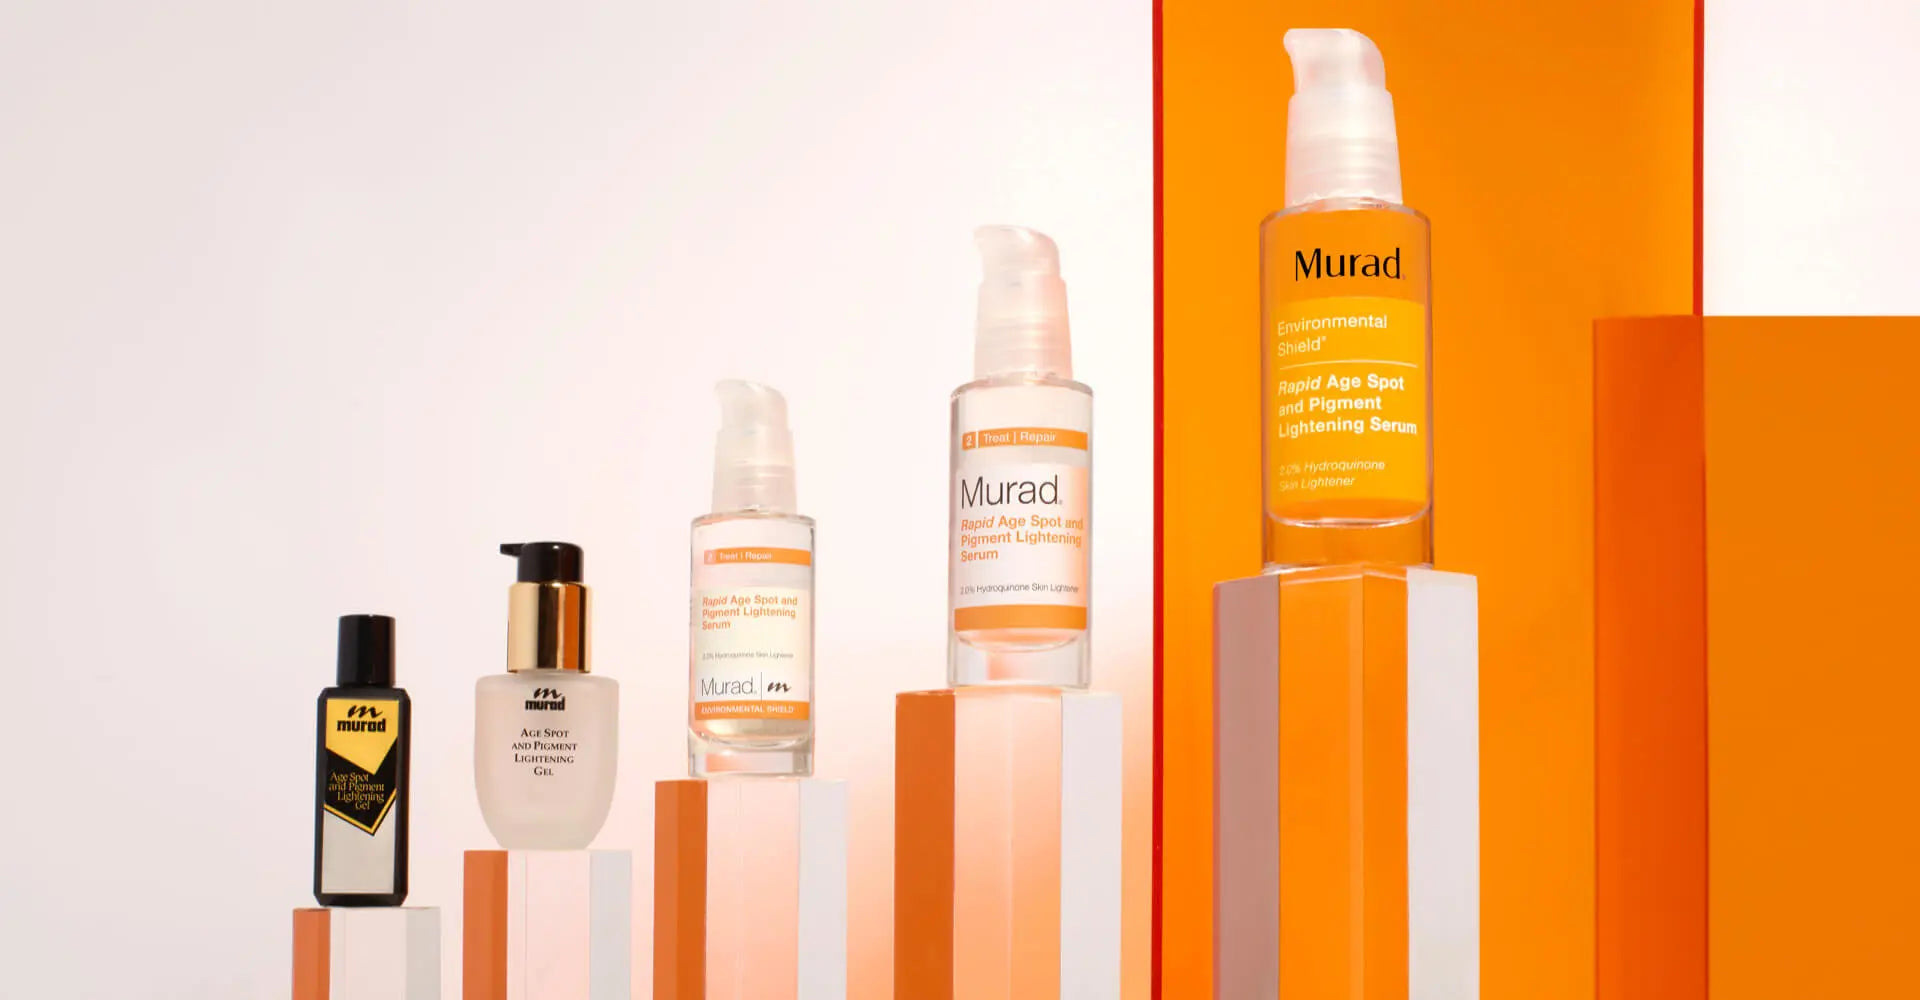 a group of murad rapid age spot and pigmentation lightening serum